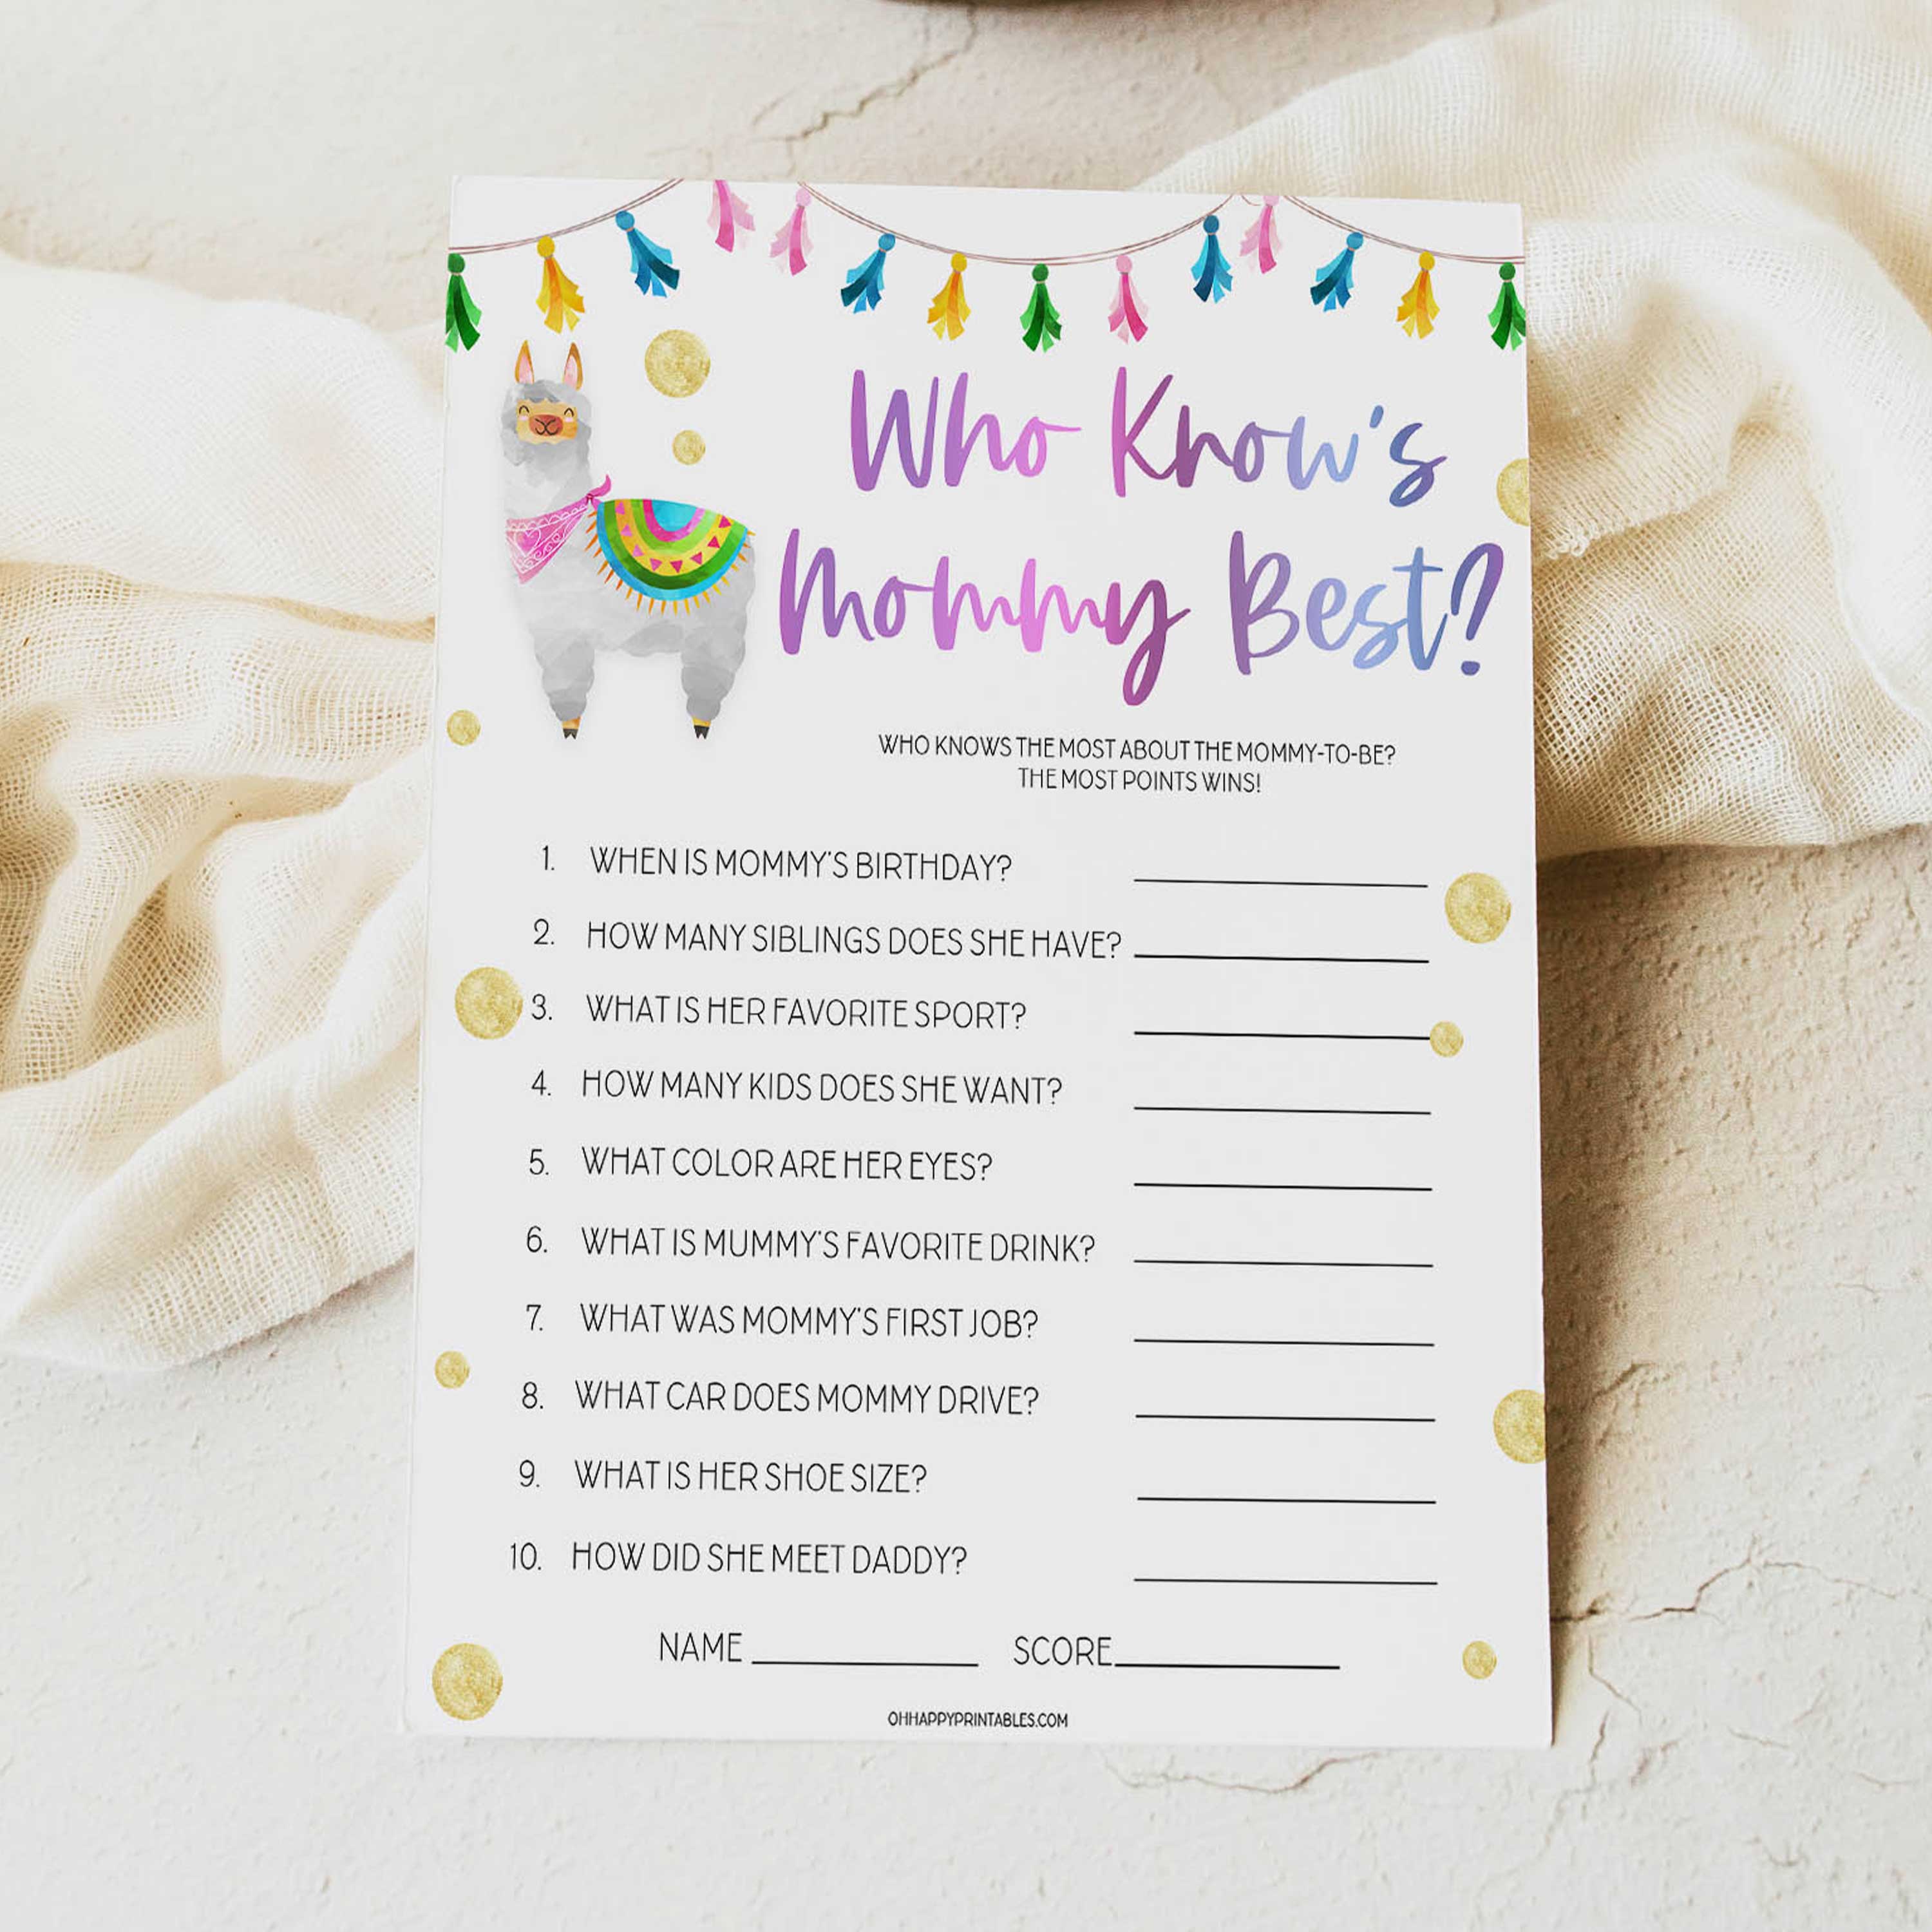 who knows mommy best game, Printable baby shower games, llama fiesta fun baby games, baby shower games, fun baby shower ideas, top baby shower ideas, Llama fiesta shower baby shower, fiesta baby shower ideas